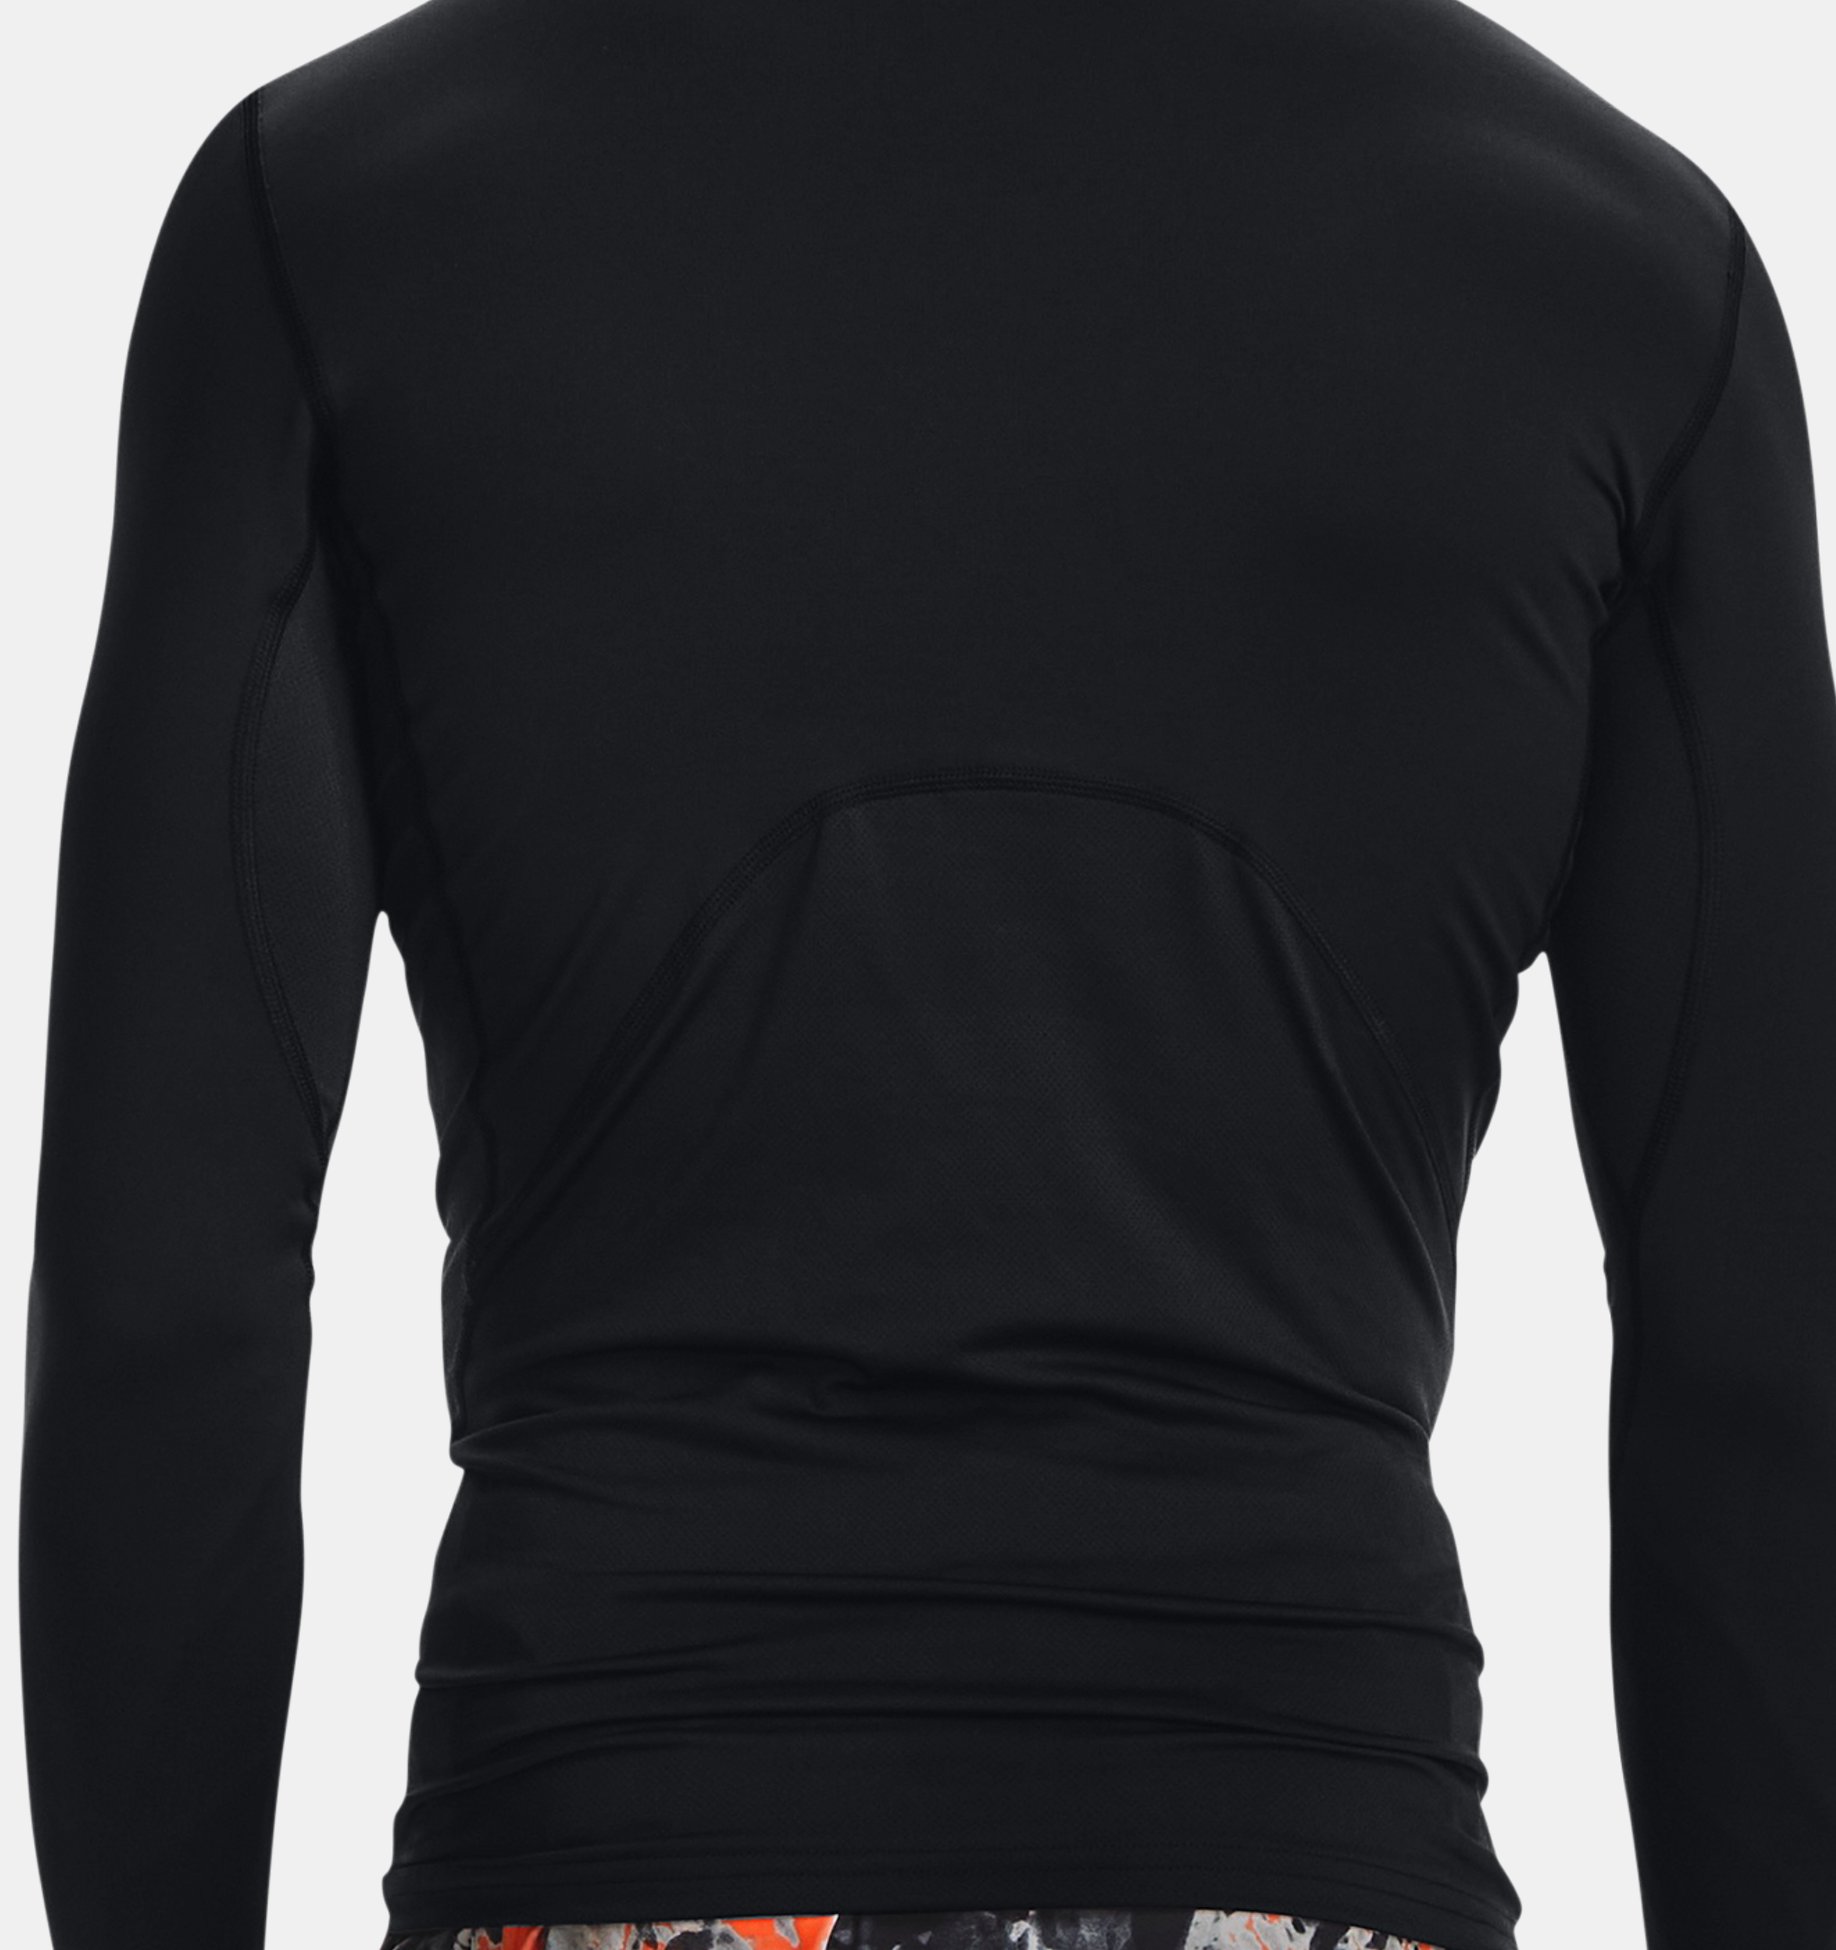 Buy Under Armour ColdGear Armour Compression Mock (1366072) from £25.40  (Today) – Best Deals on